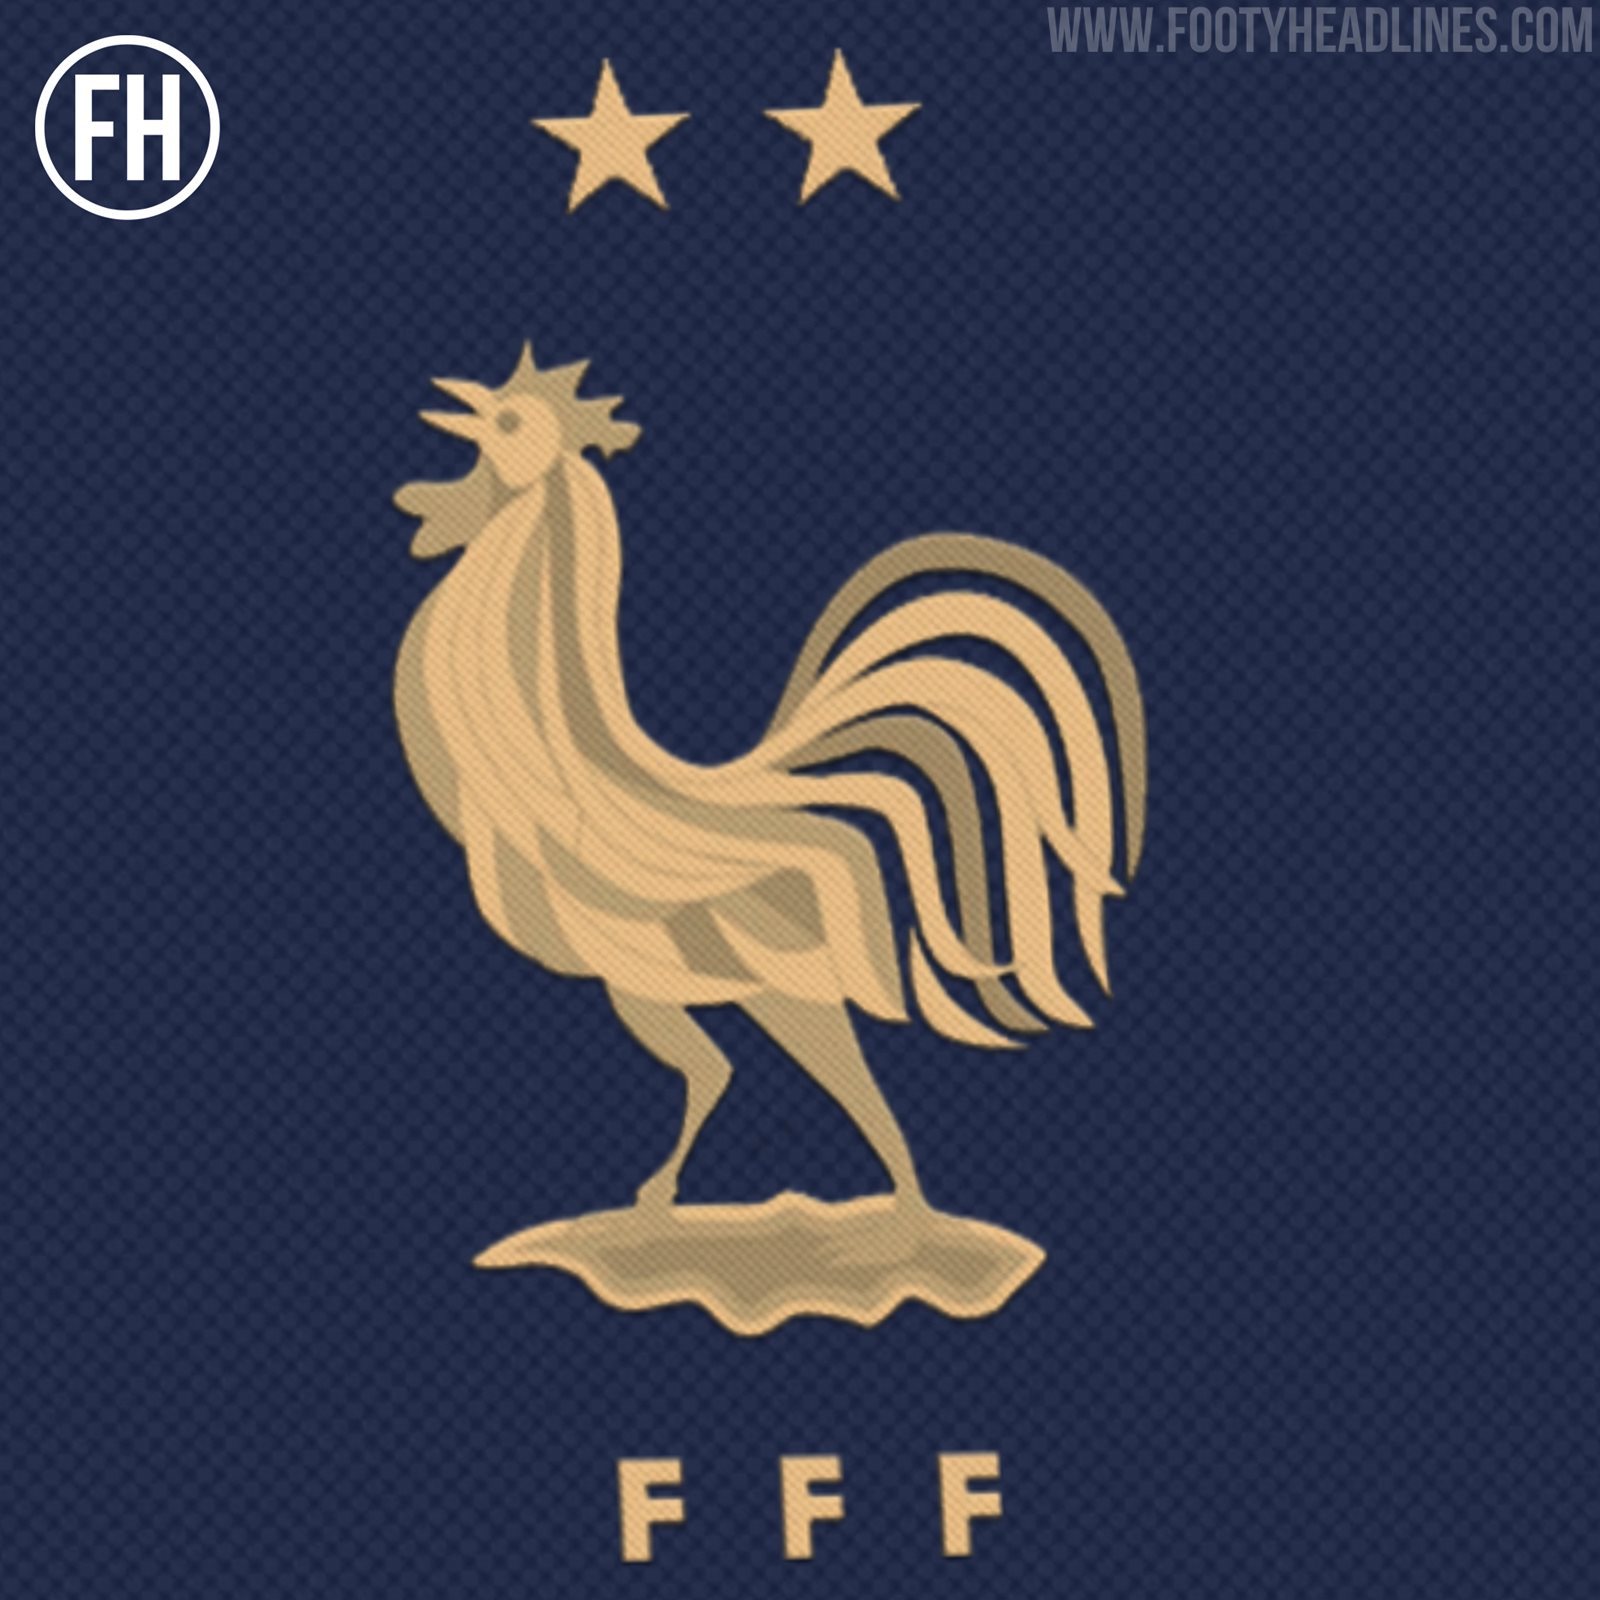 France 2022 World Cup Home Kit Info Leaked - Footy Headlines